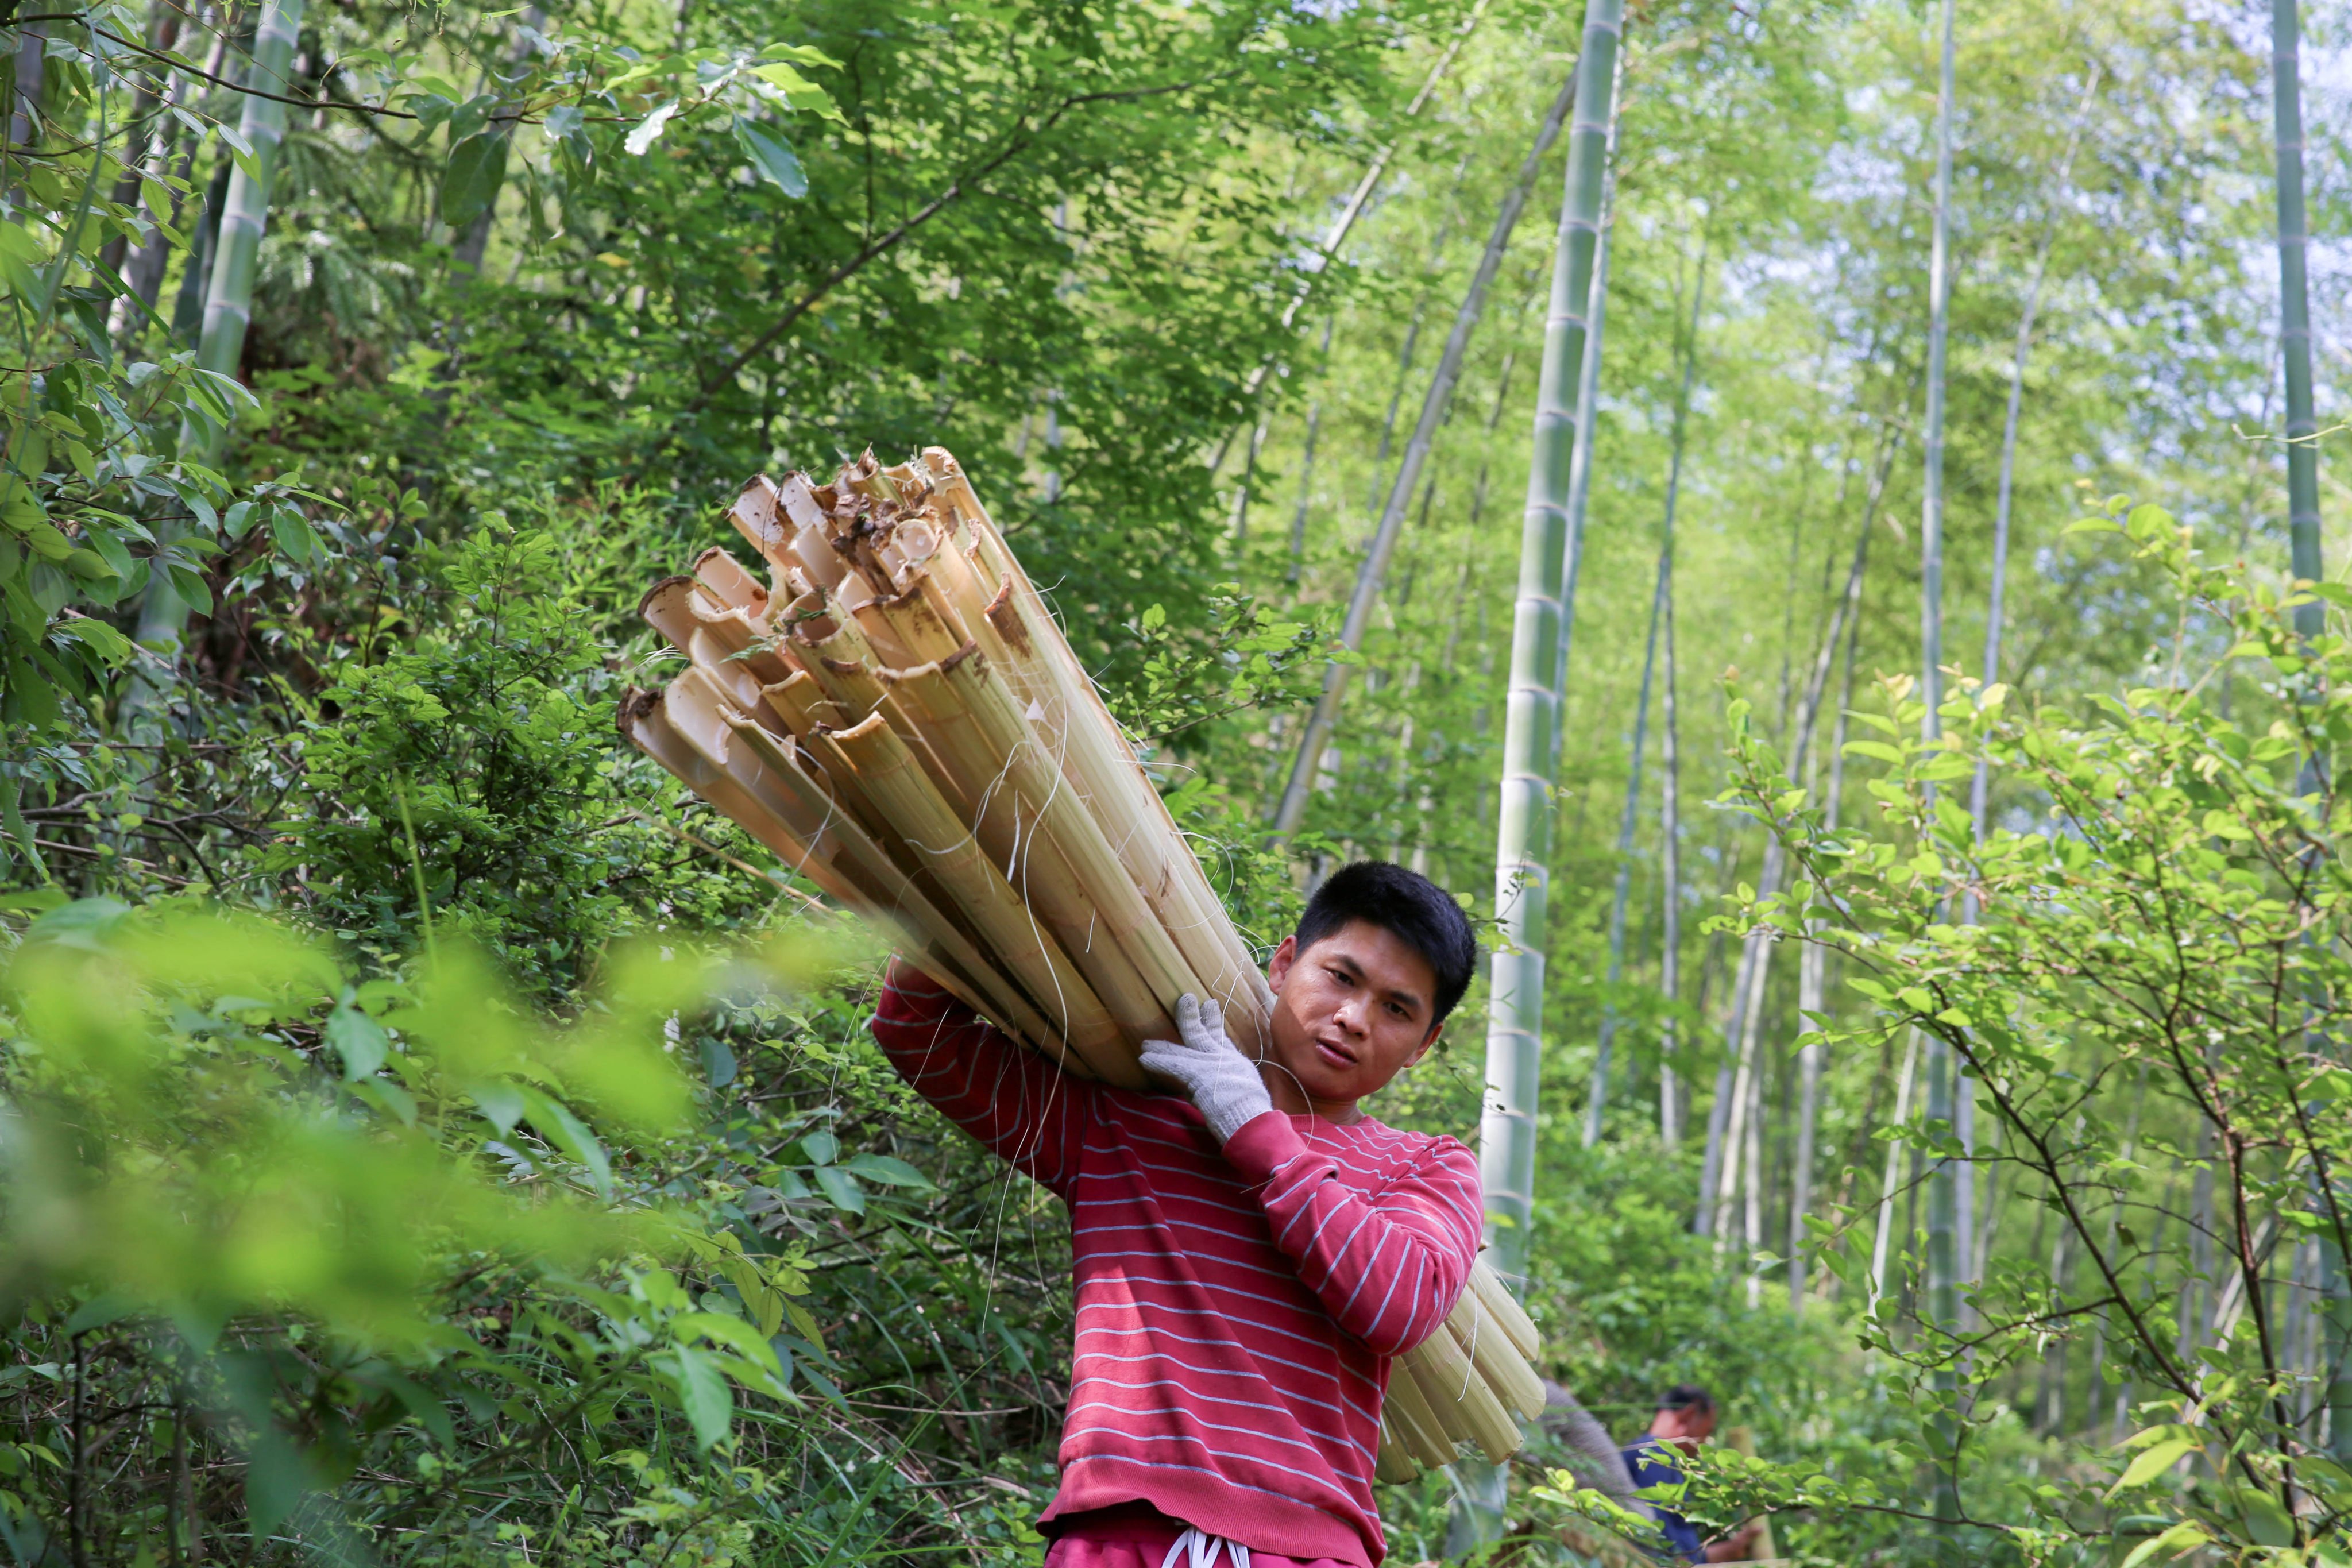 Bamboo is the richest natural resource in Anji county, located a three-hour drive from Shanghai. Photo: Xinhua